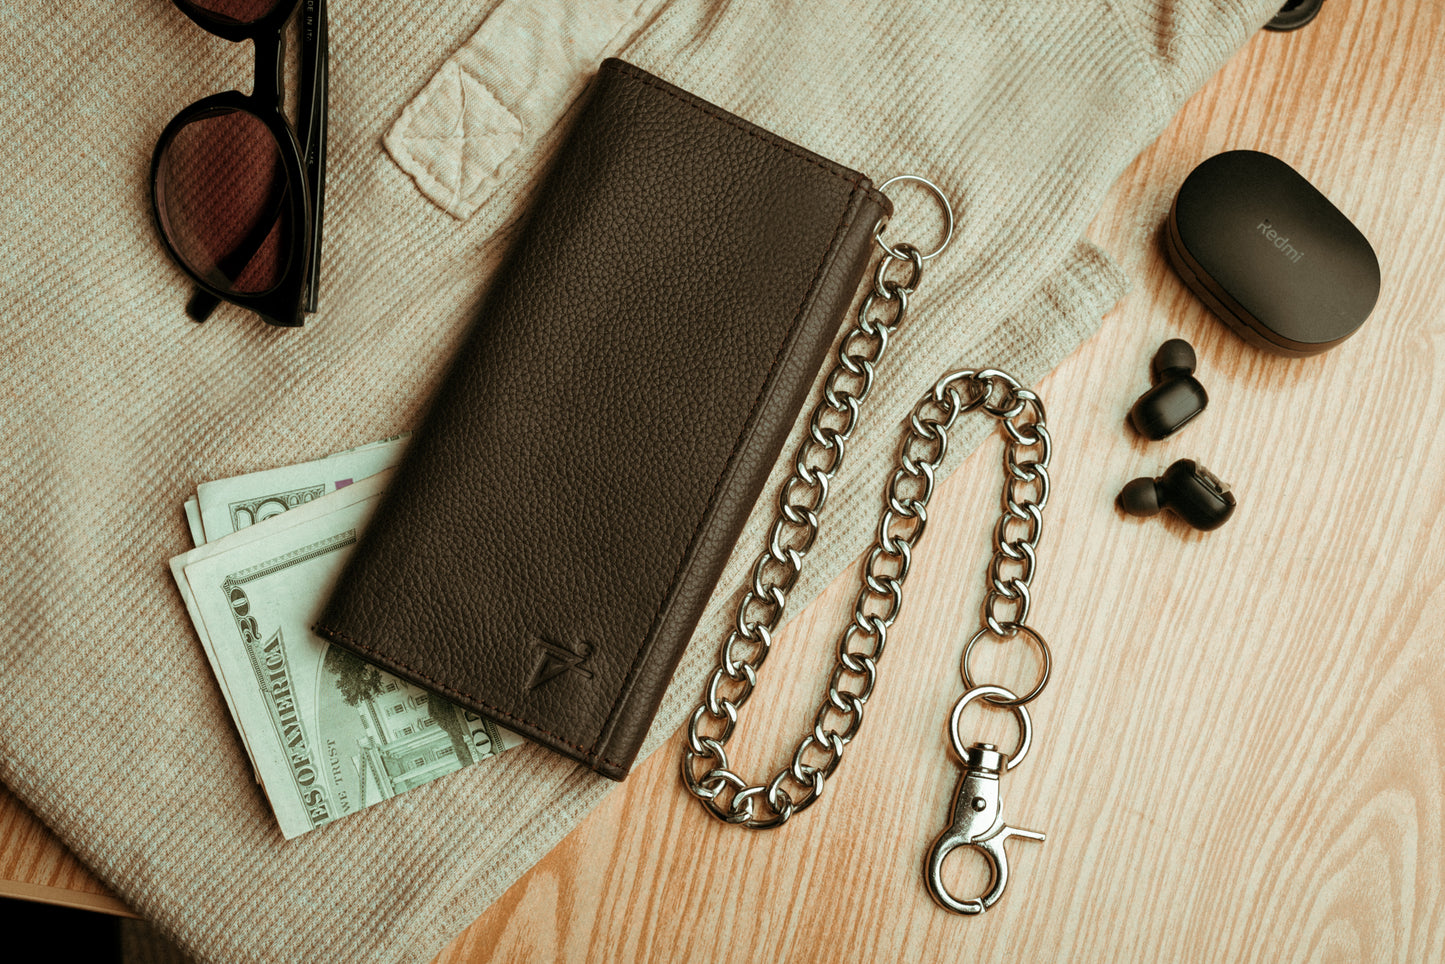 Men's Tall Trifold Chain Wallet with Snap RFID